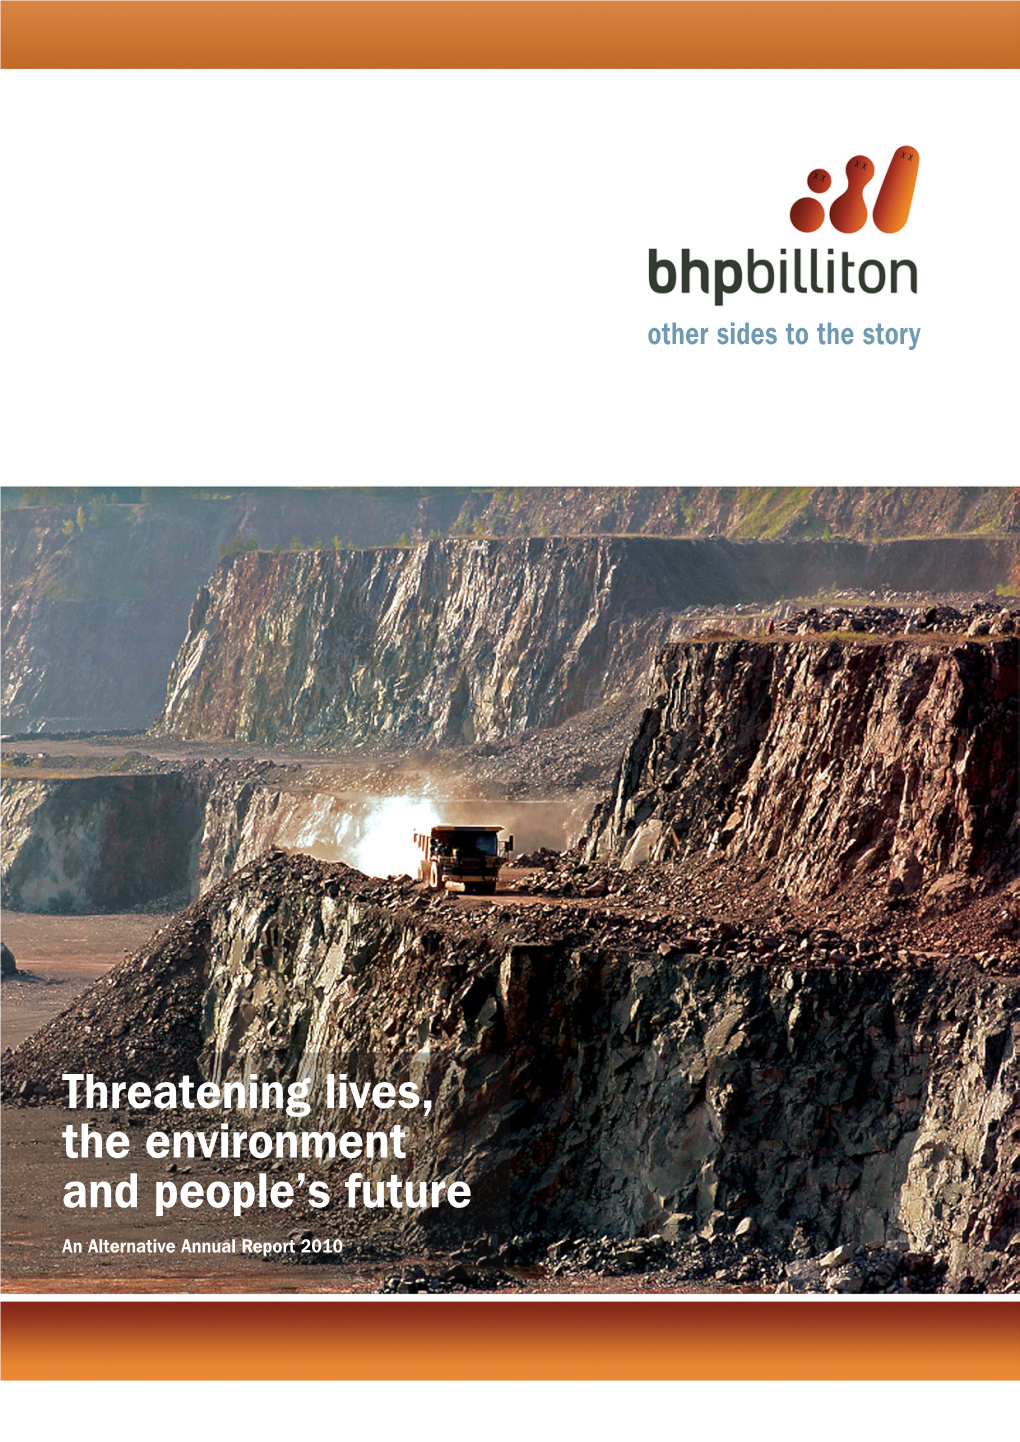 BHP Billiton Alternative Annual Report 2010 This Report Examines a Number of BHP Billiton’S Activities Must Not Take Place